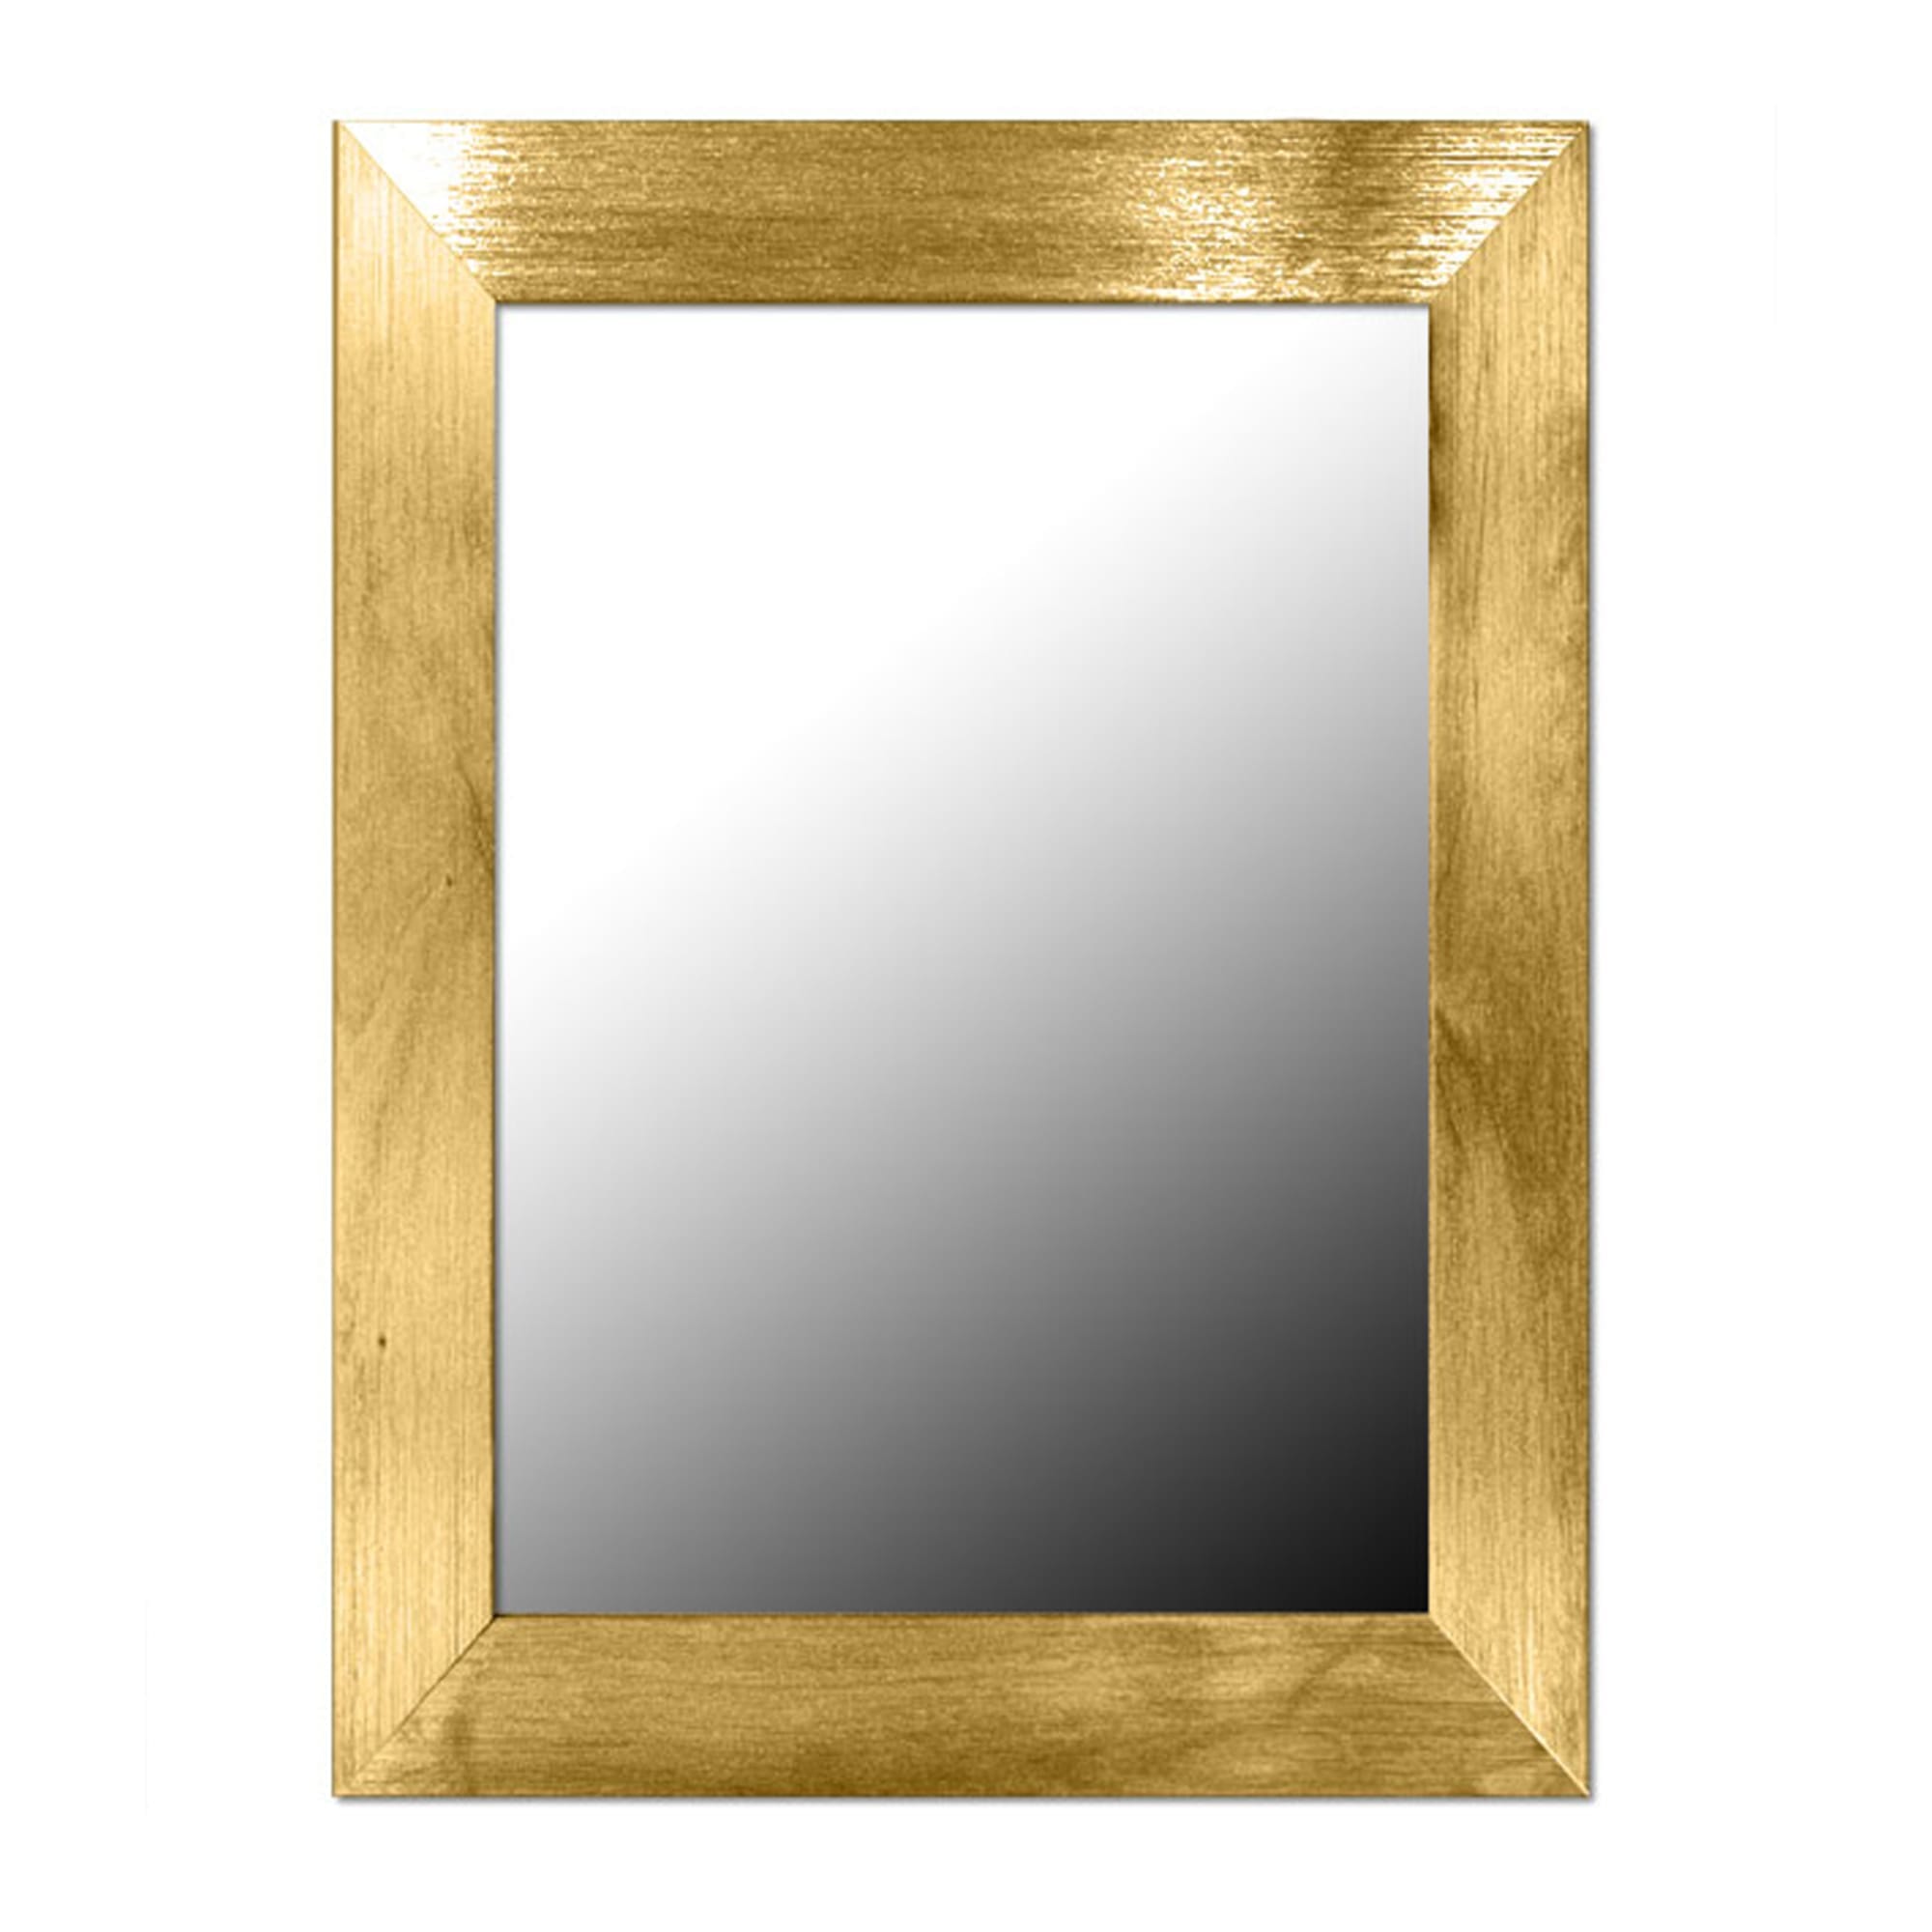 Home Basics Contemporary Rectangle Wall Mirror, Gold $5.00 EACH, CASE PACK OF 6